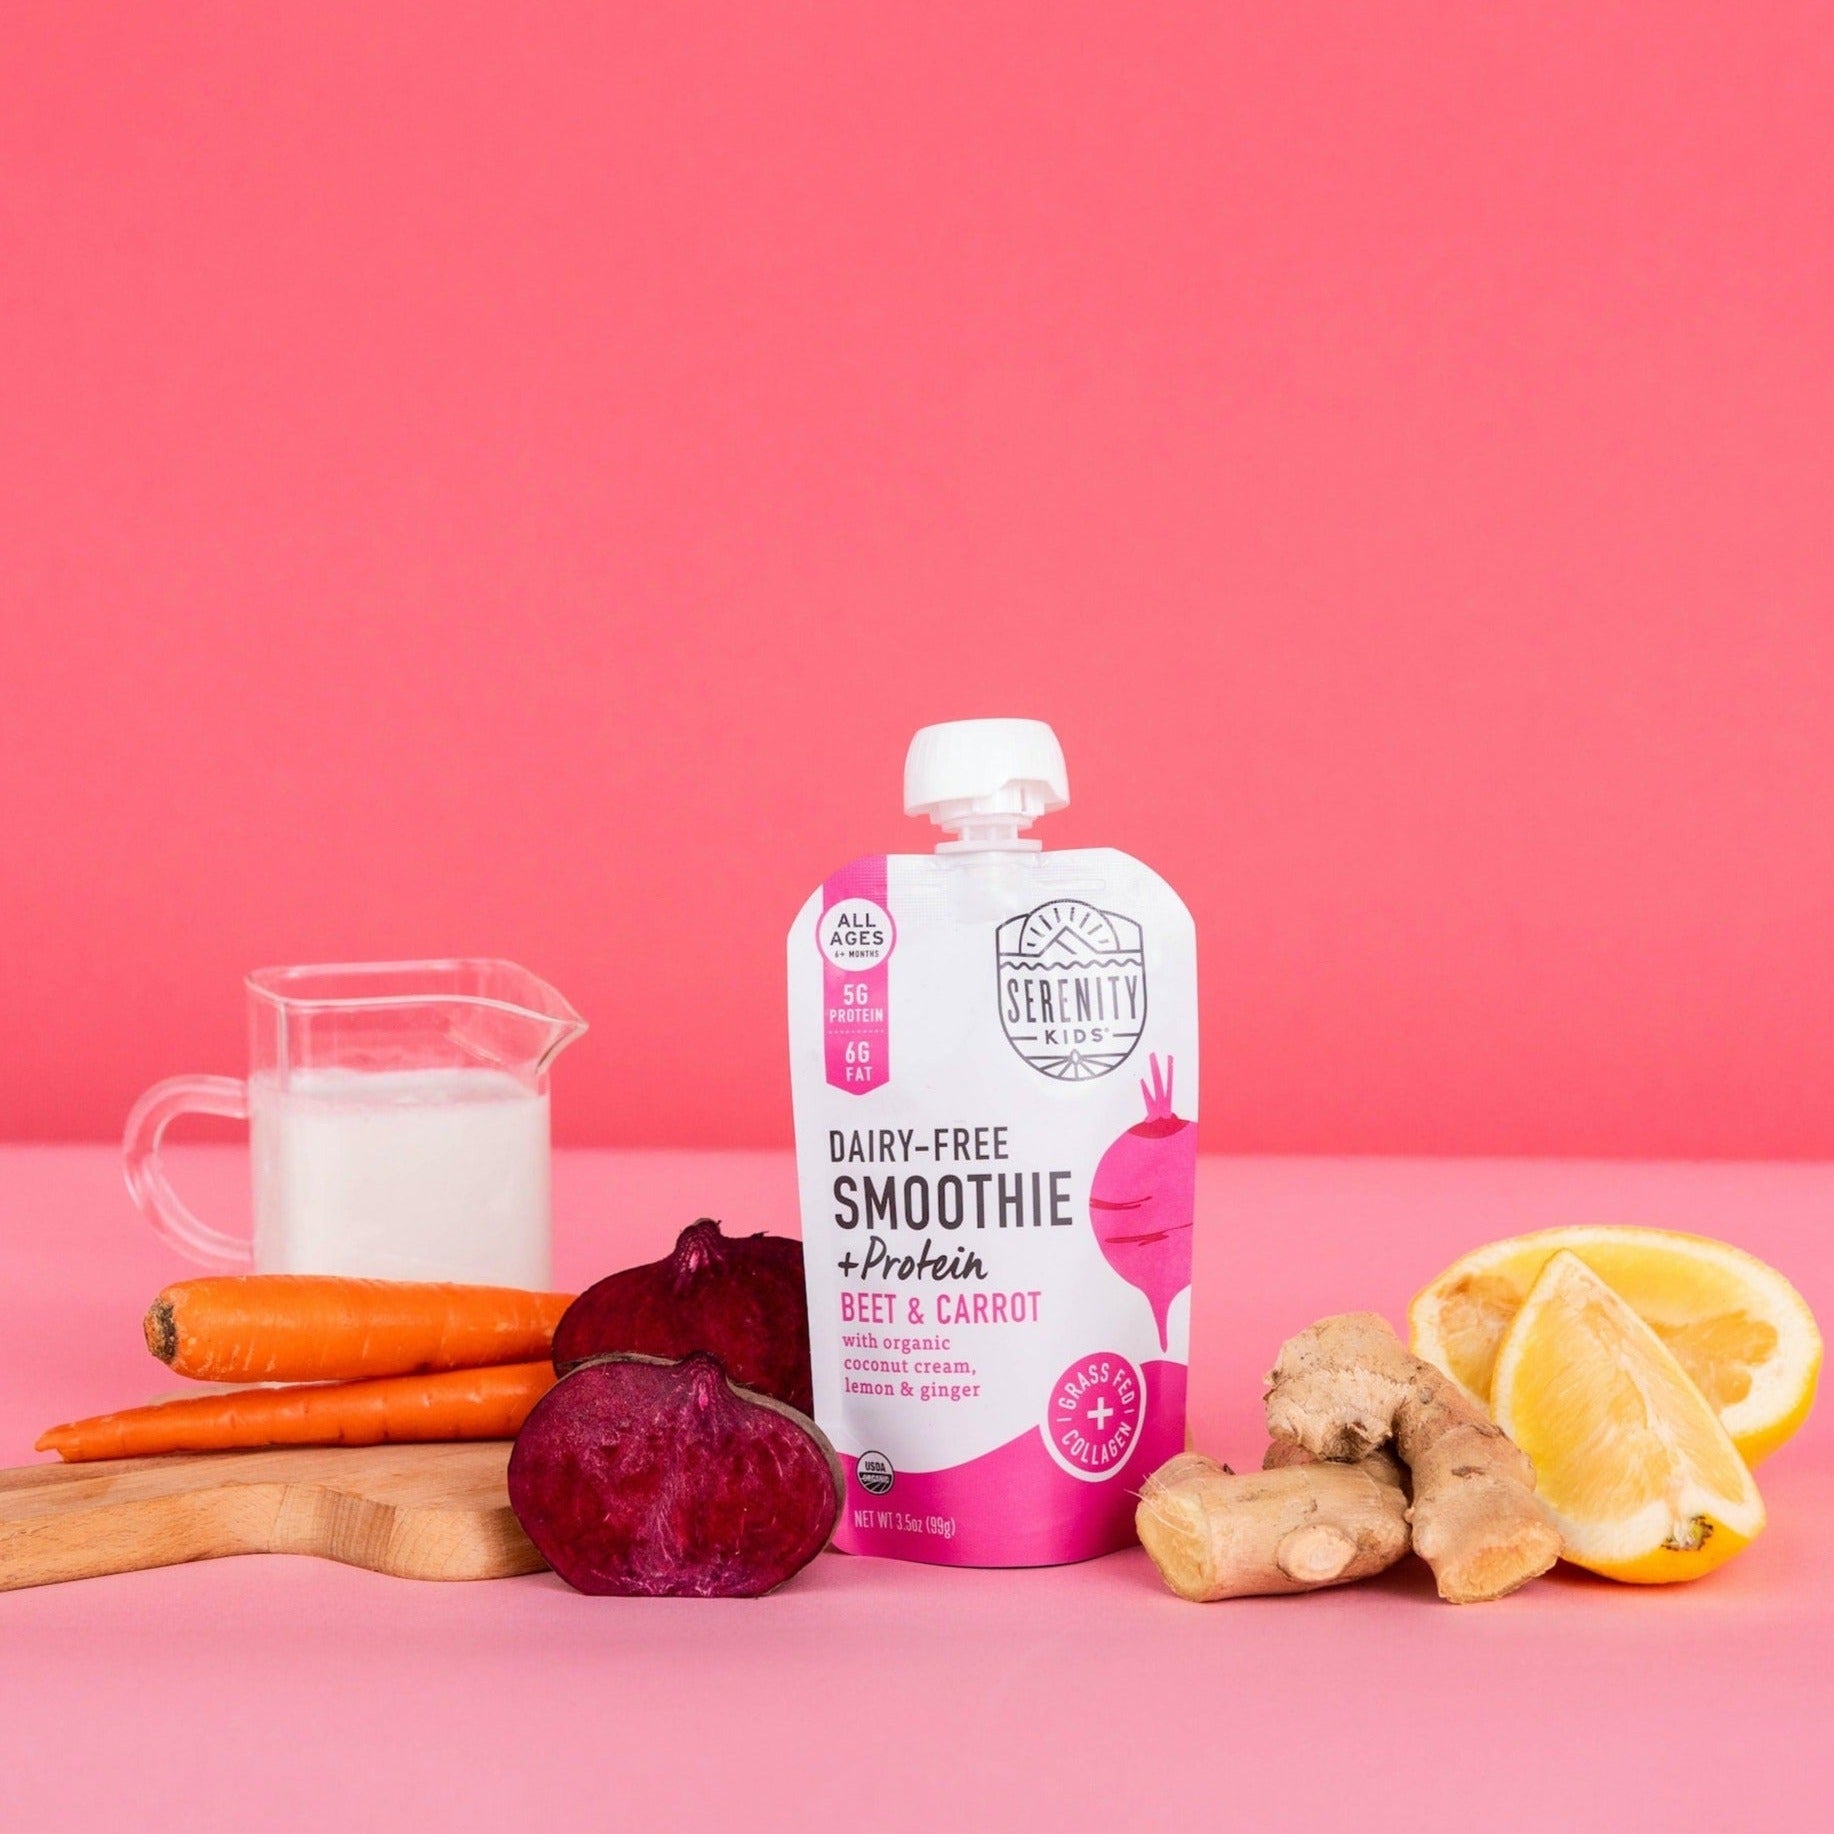 Beet & Carrot Dairy-Free Smoothie + Protein - Serenity Kids - Smoothie Pouch